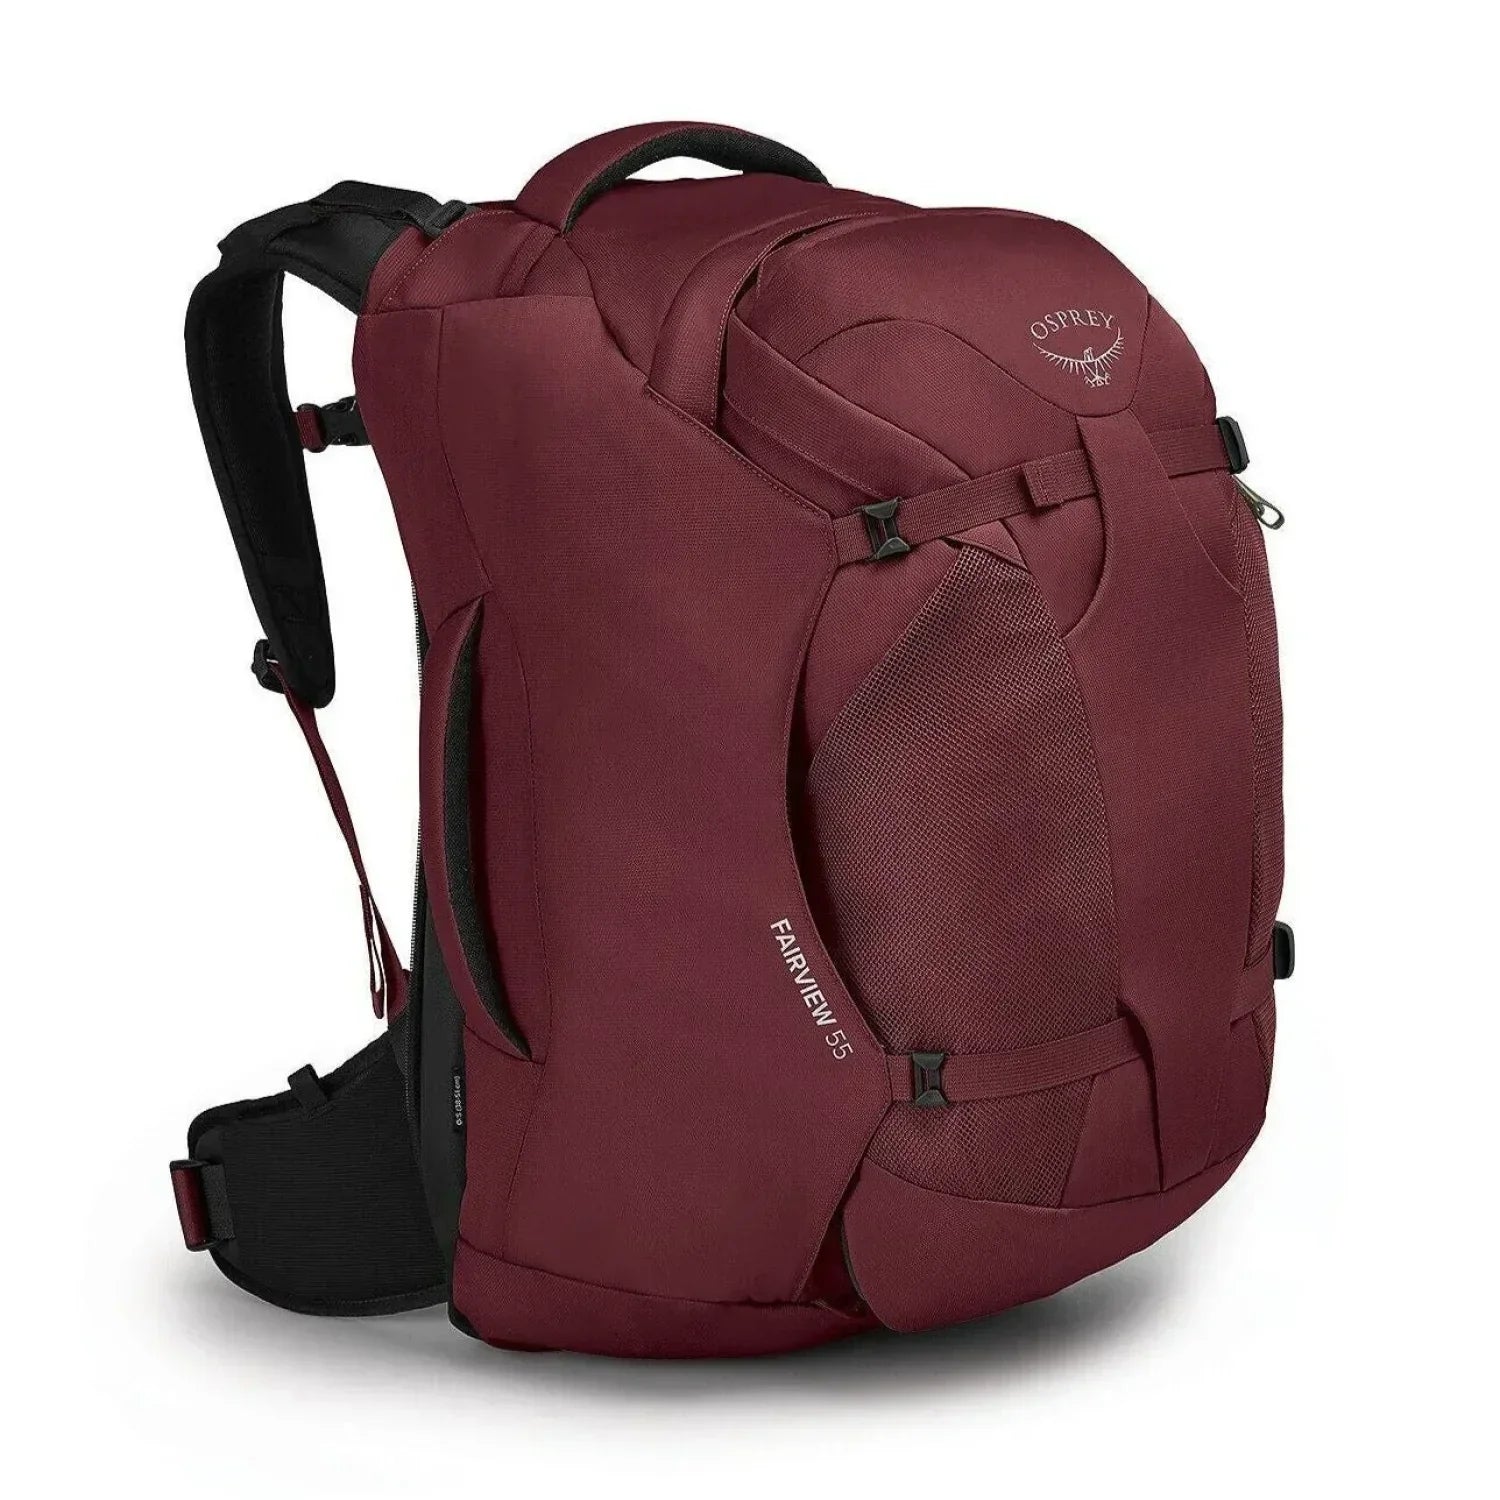 Osprey Packs PACKS|LUGGAGE - PACK|ACTIVE - OVERNIGHT PACK Women's Fairview 55 ZIRCON RED O S